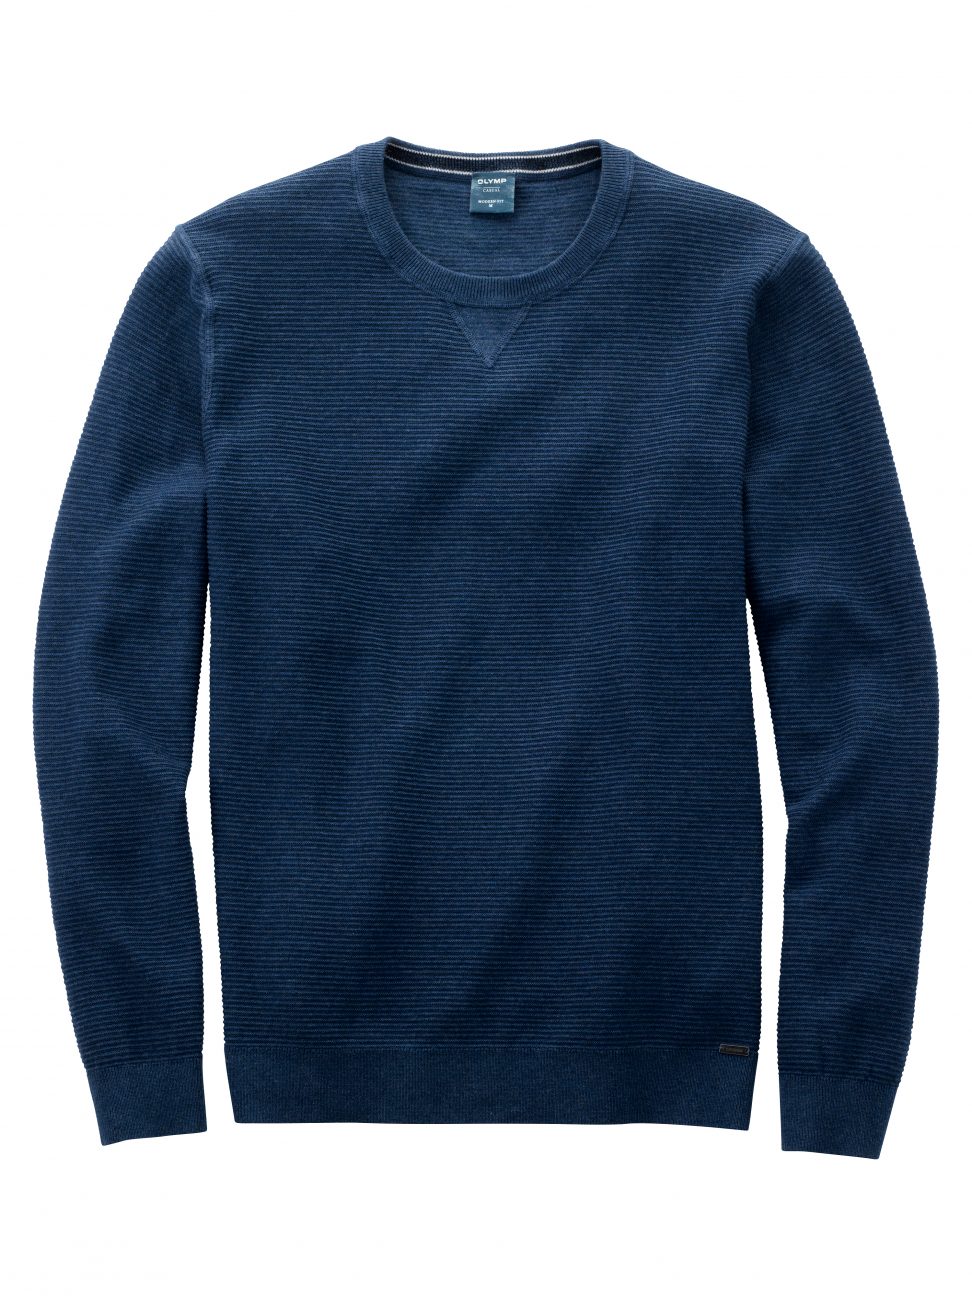 Olymp Sweter modern fit / Indygo / Pullover crew neck / 53018515